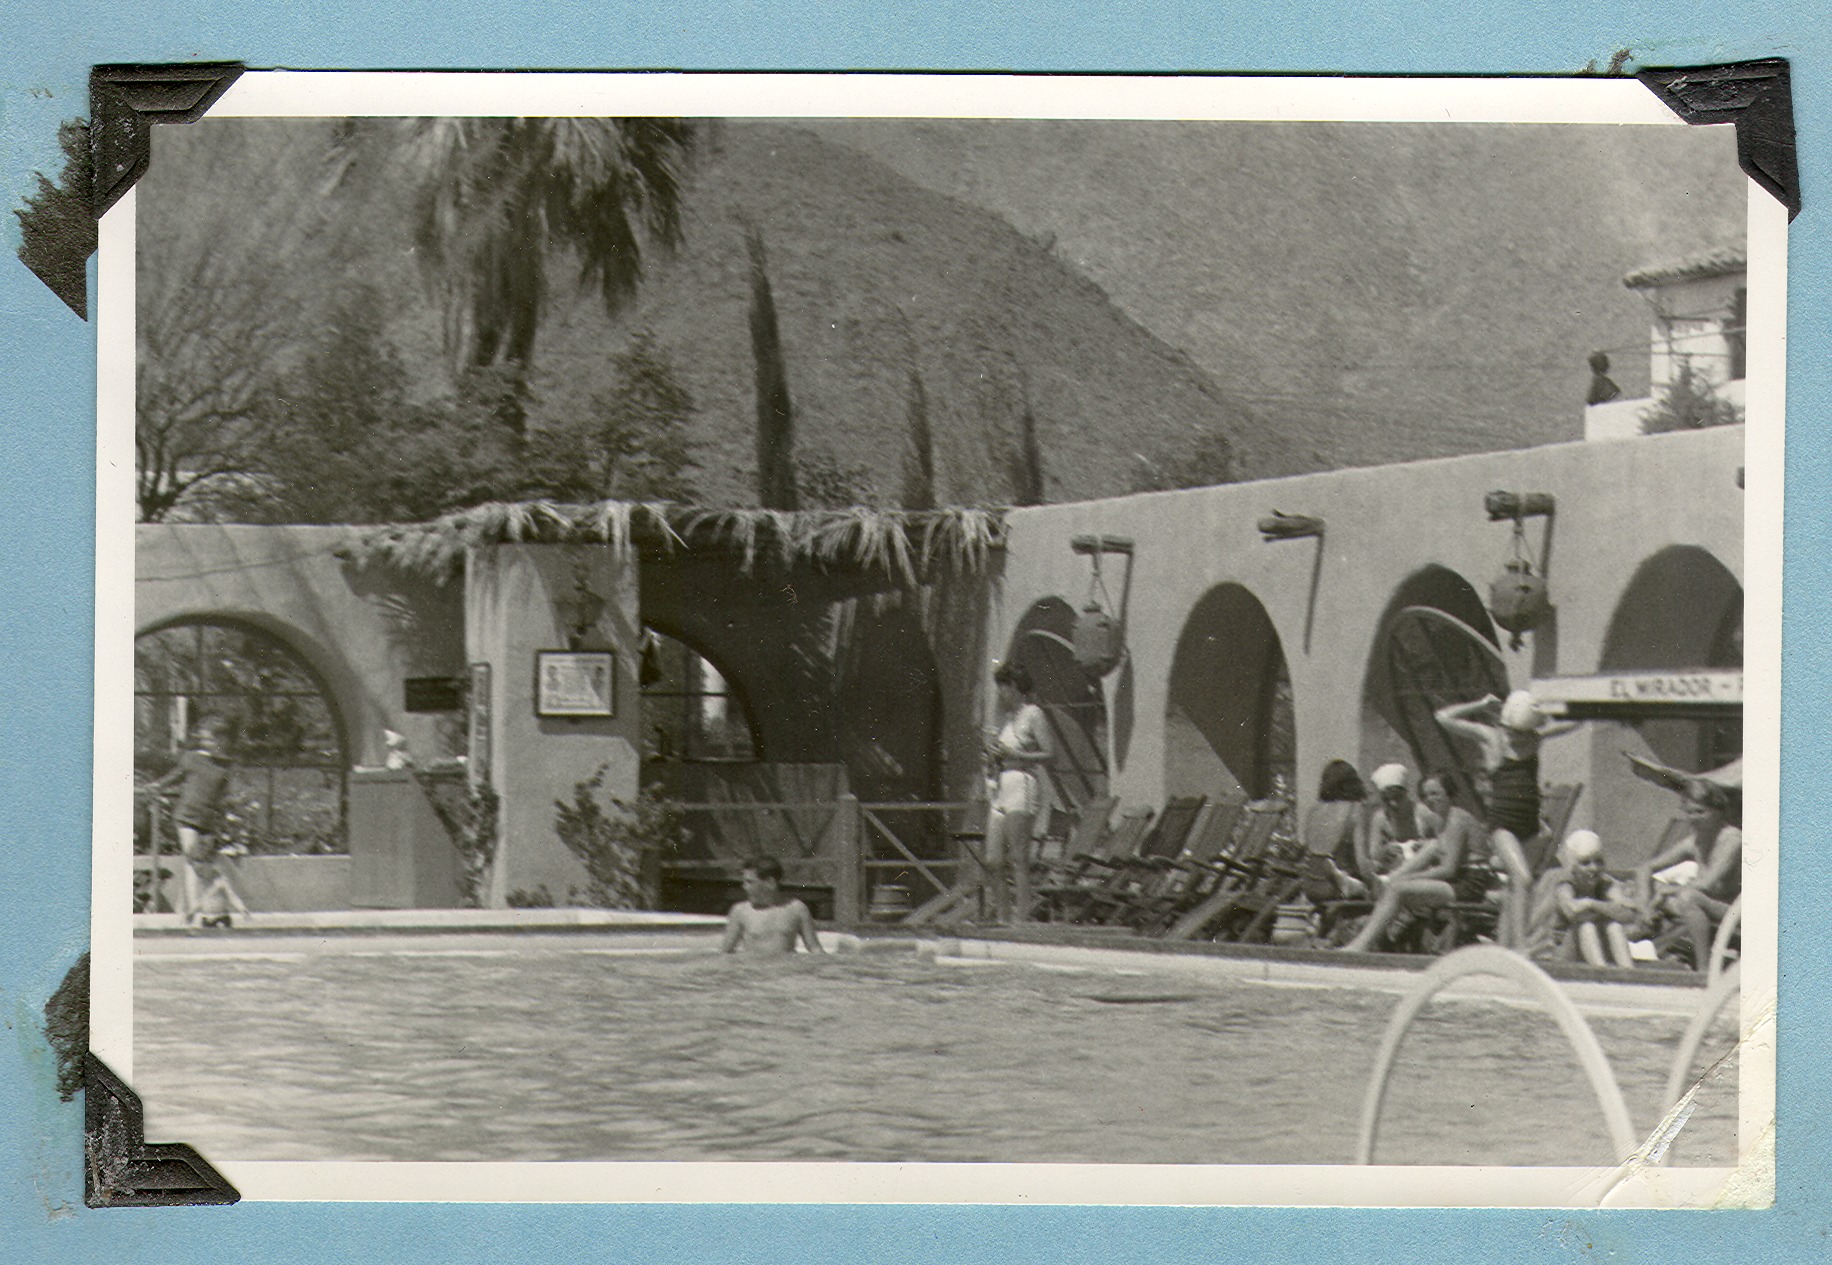 People swimming at pool in Palm Springs, California: photographic print